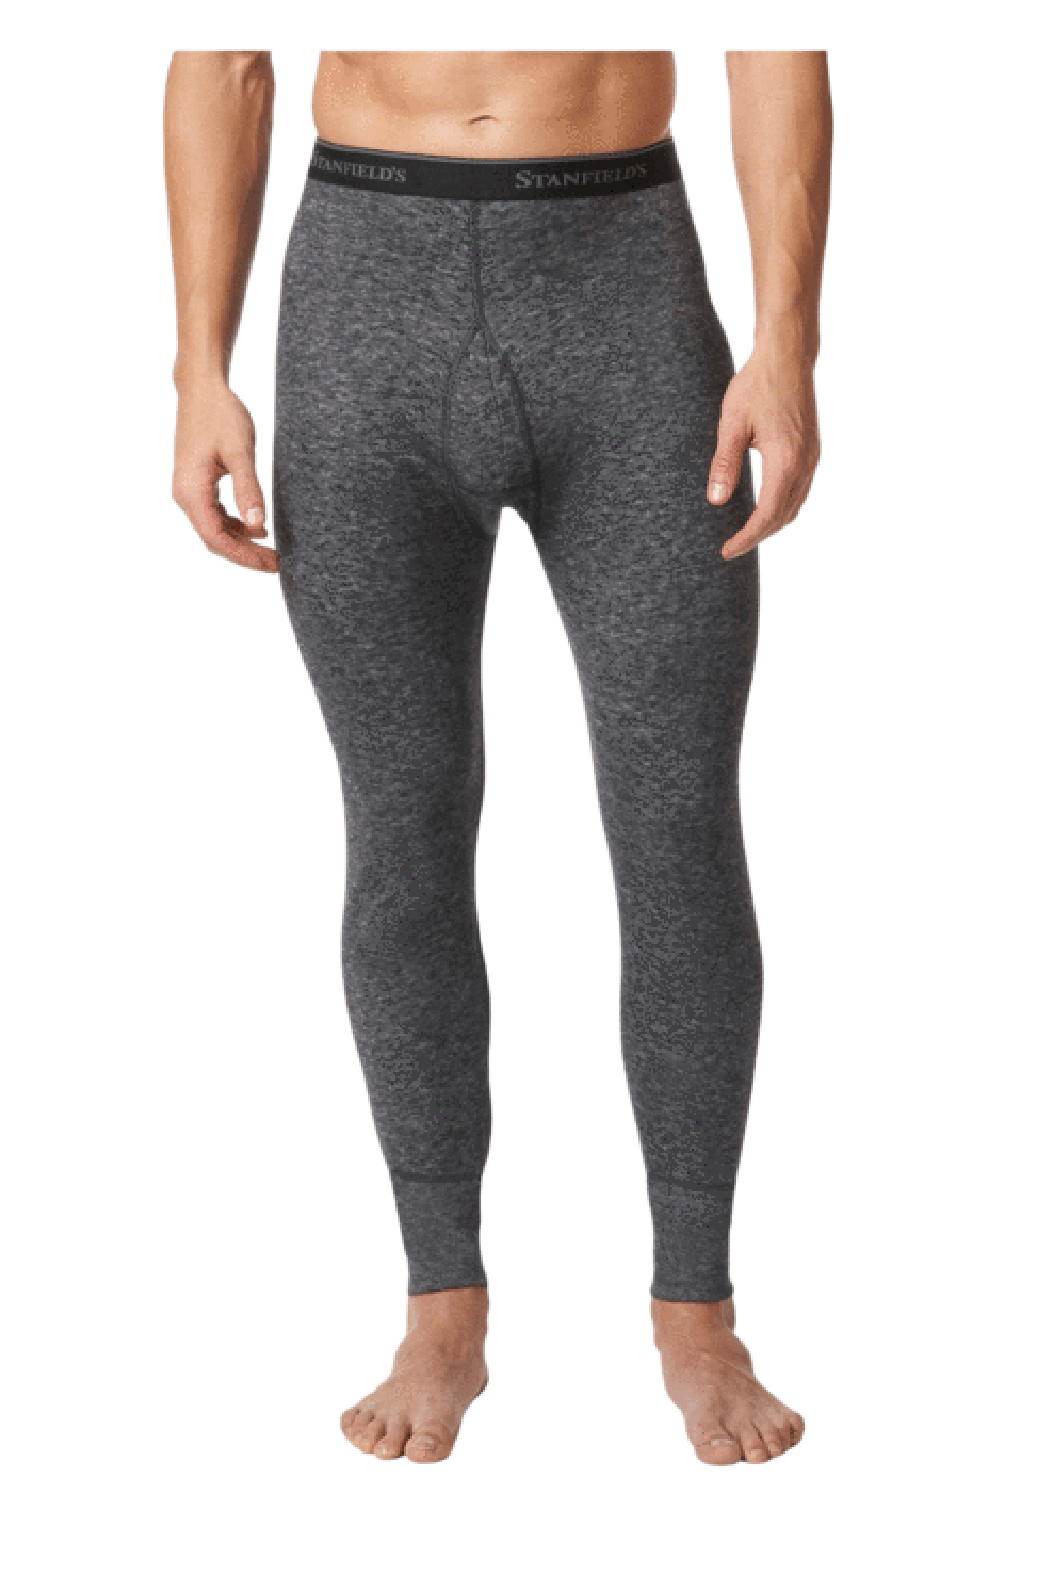 Two-Layer Wool Blend Long Underwear – The Old Mill